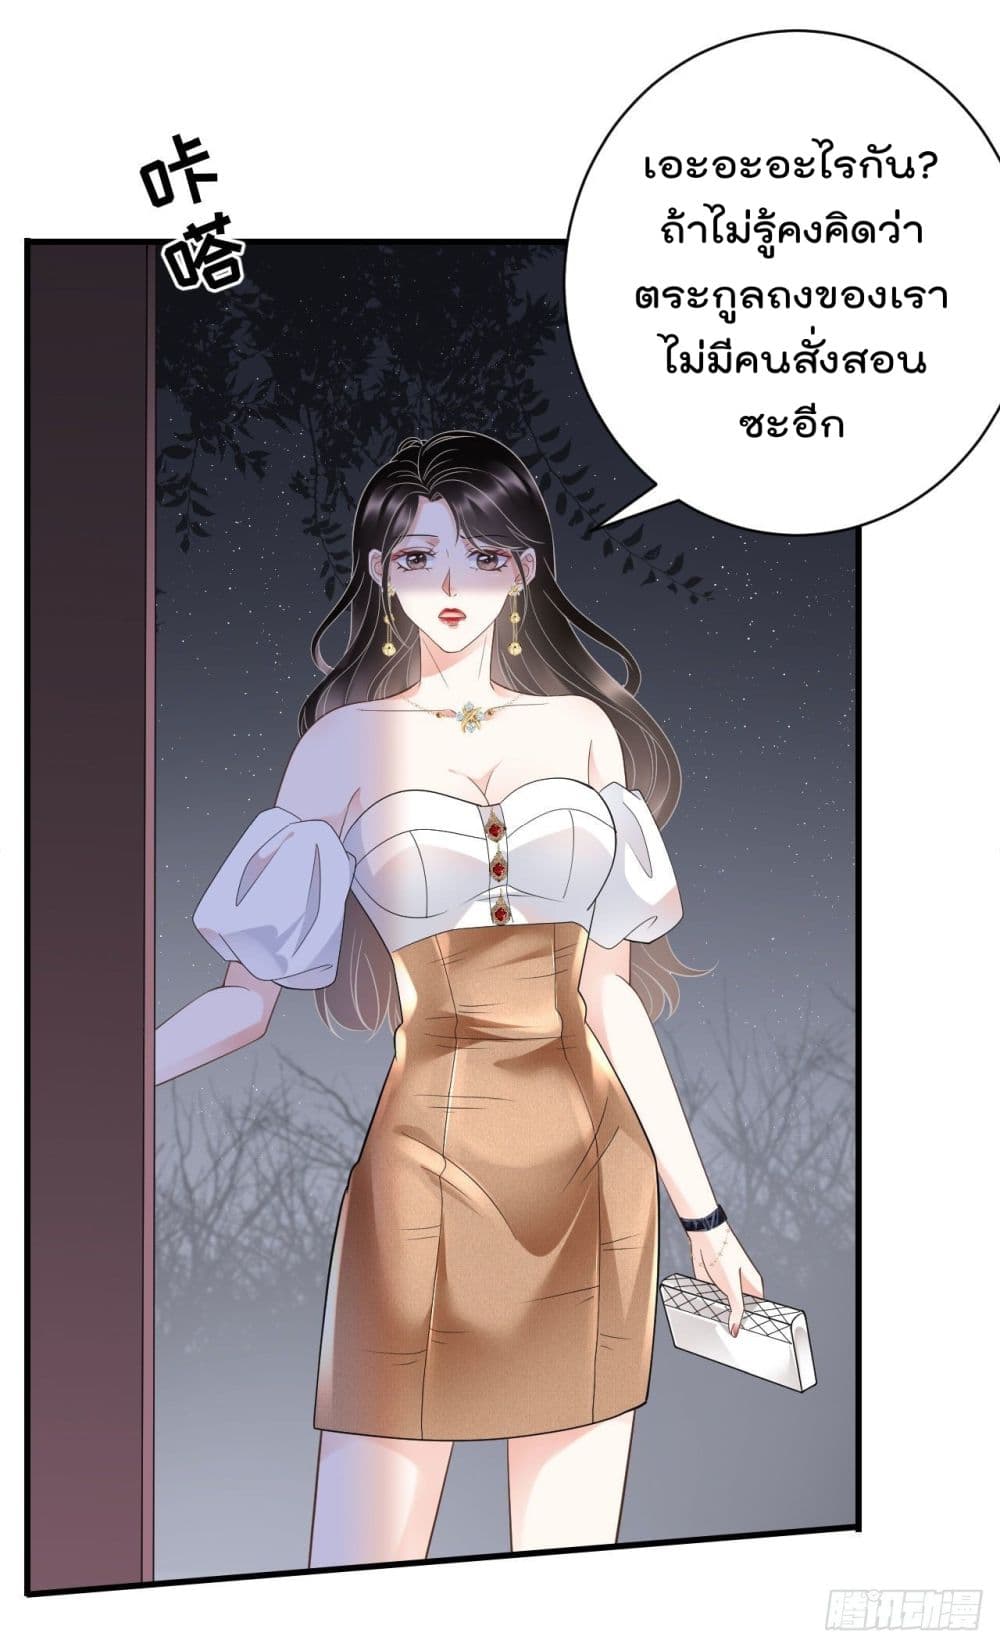 What Can the Eldest Lady Have คุณหนูใหญ่ ทำไมคุณร้ายอย่างนี้ 24-24